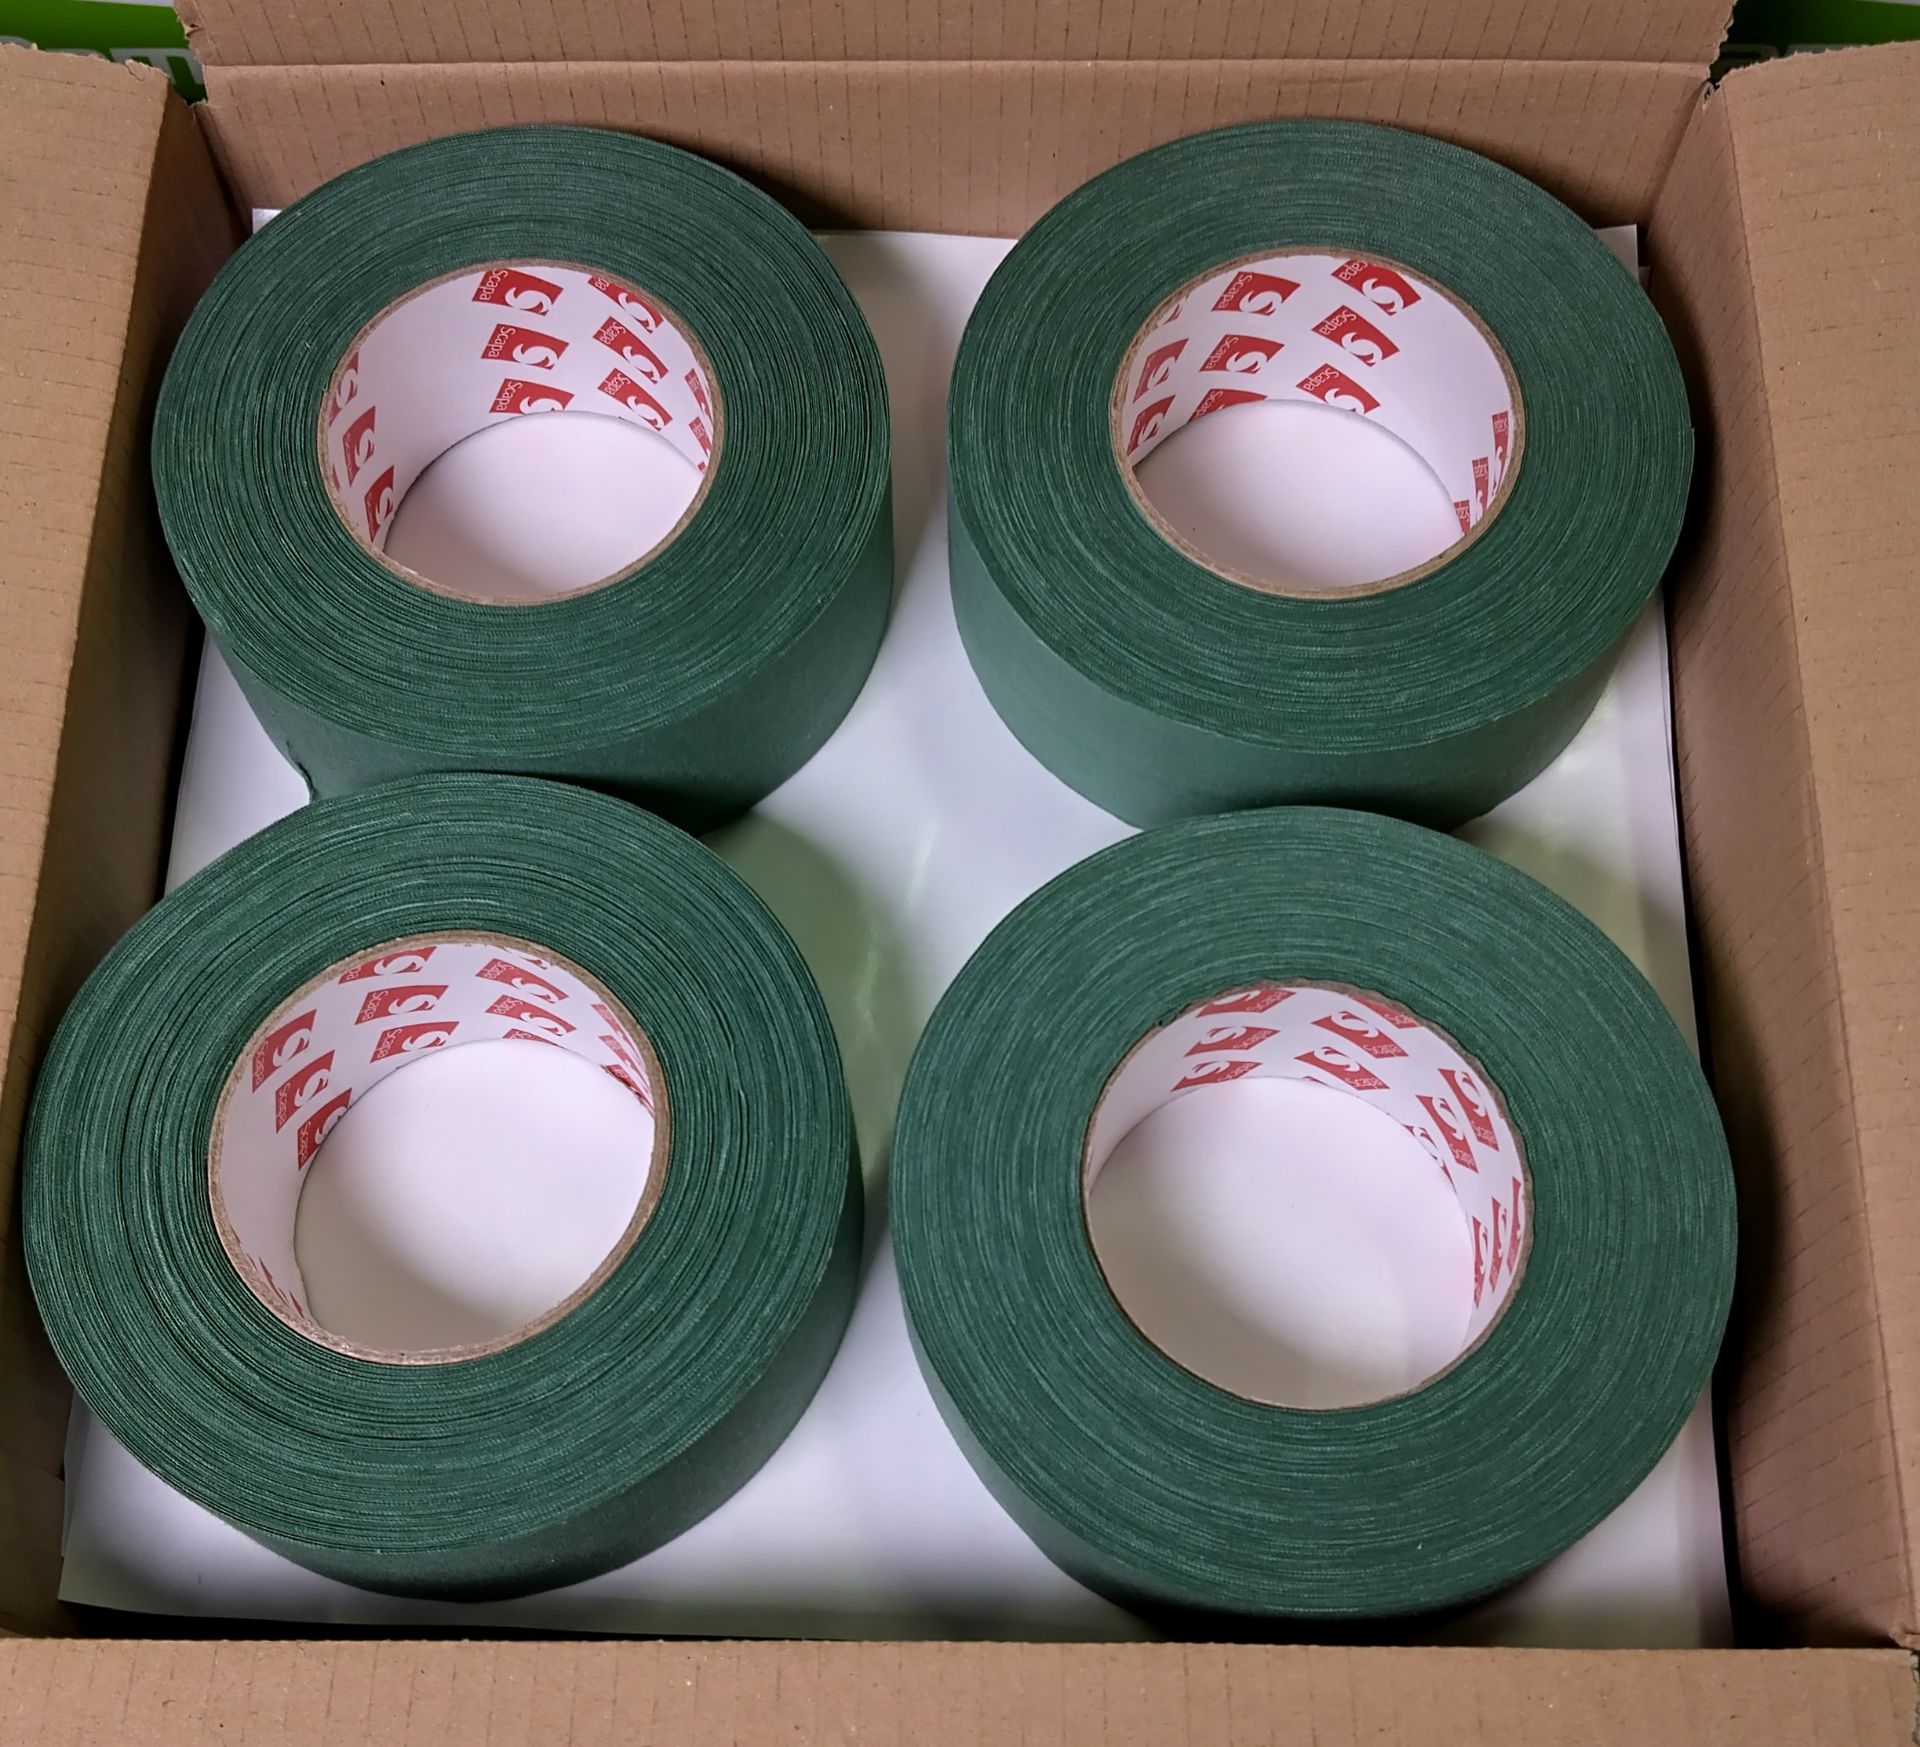 2x boxes of Scapa 3302 uncoated cotton cloth adhesive tape - olive green - 50mm x 50m - 16 per box - Image 2 of 3